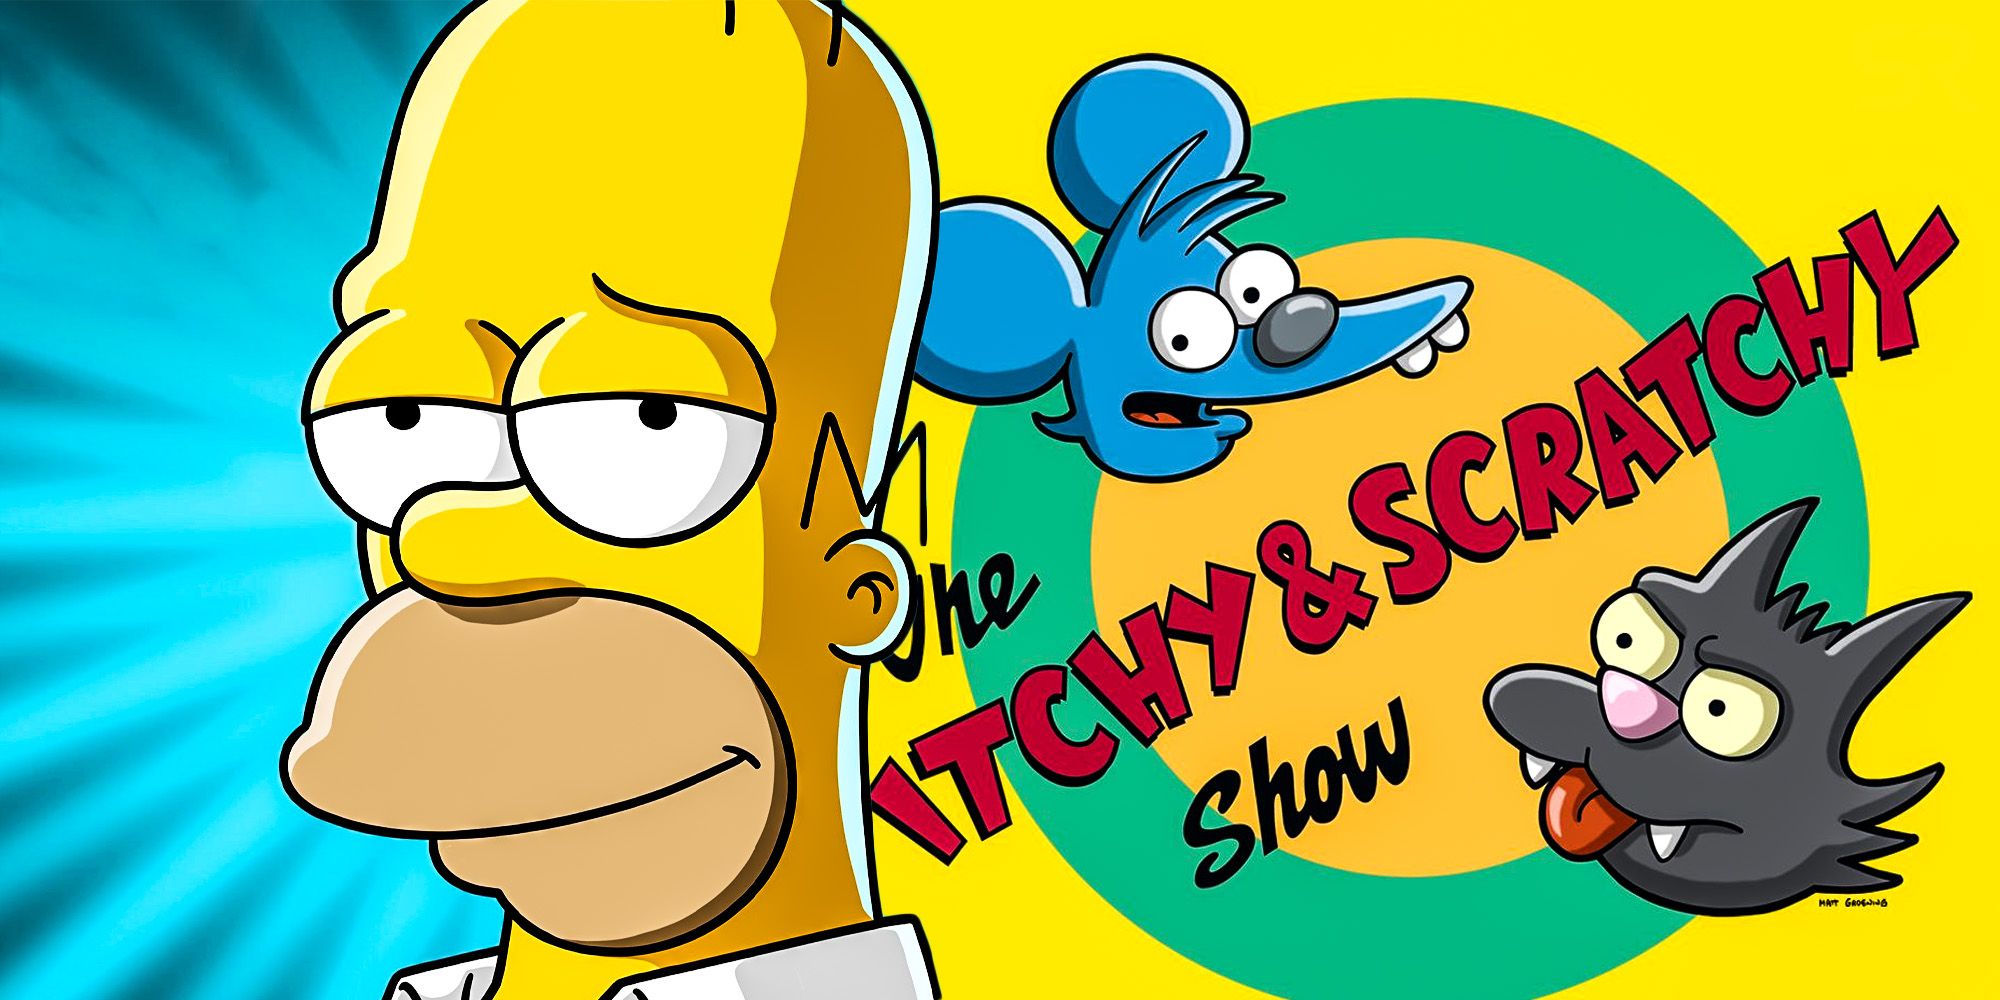 Itchy and Scratchy The simpsons